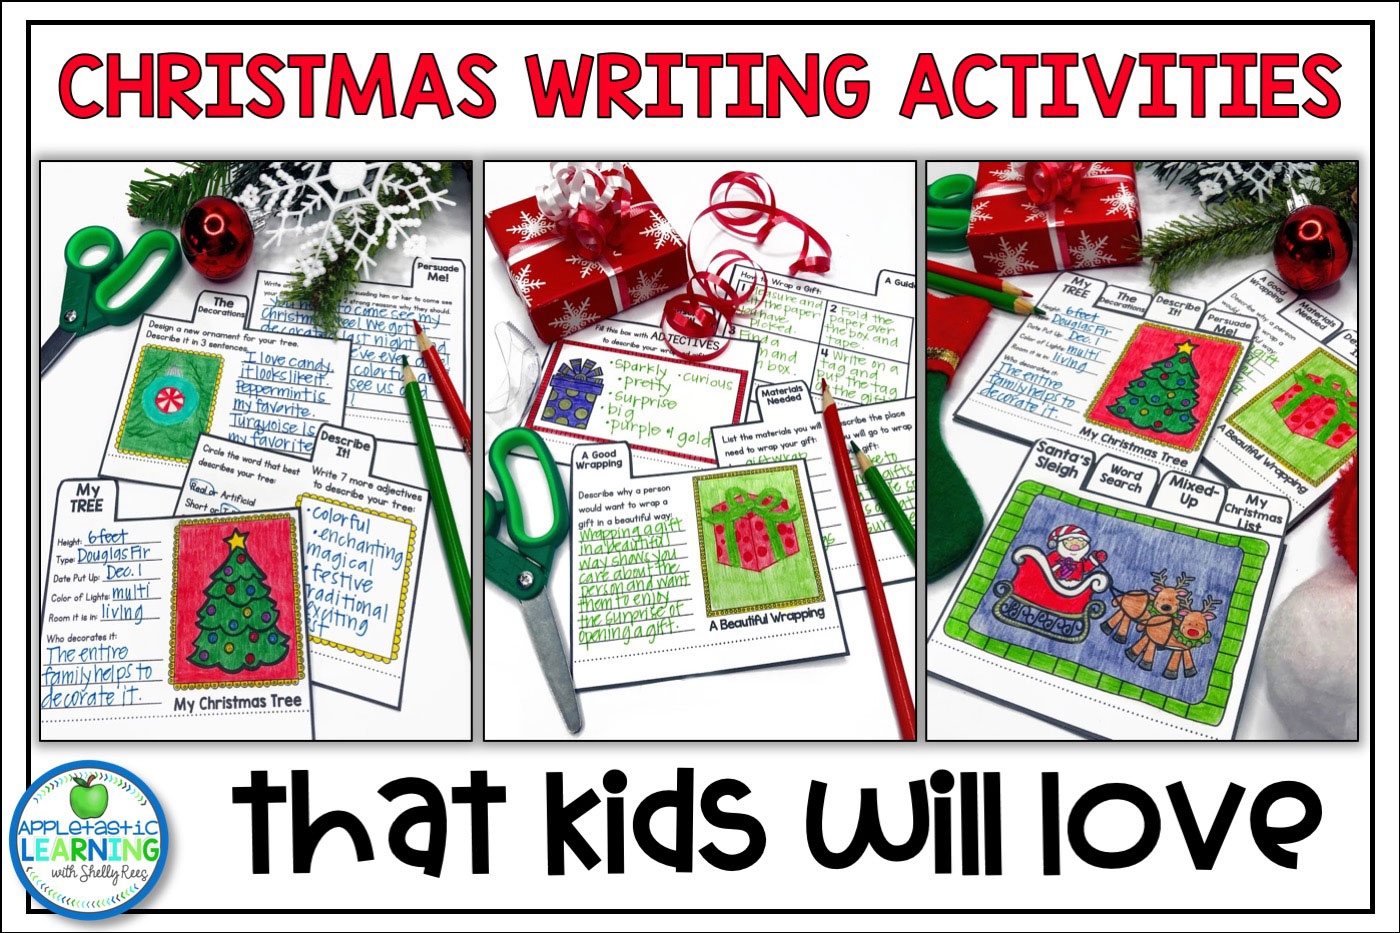 Christmas Writing Activities for Elementary Students